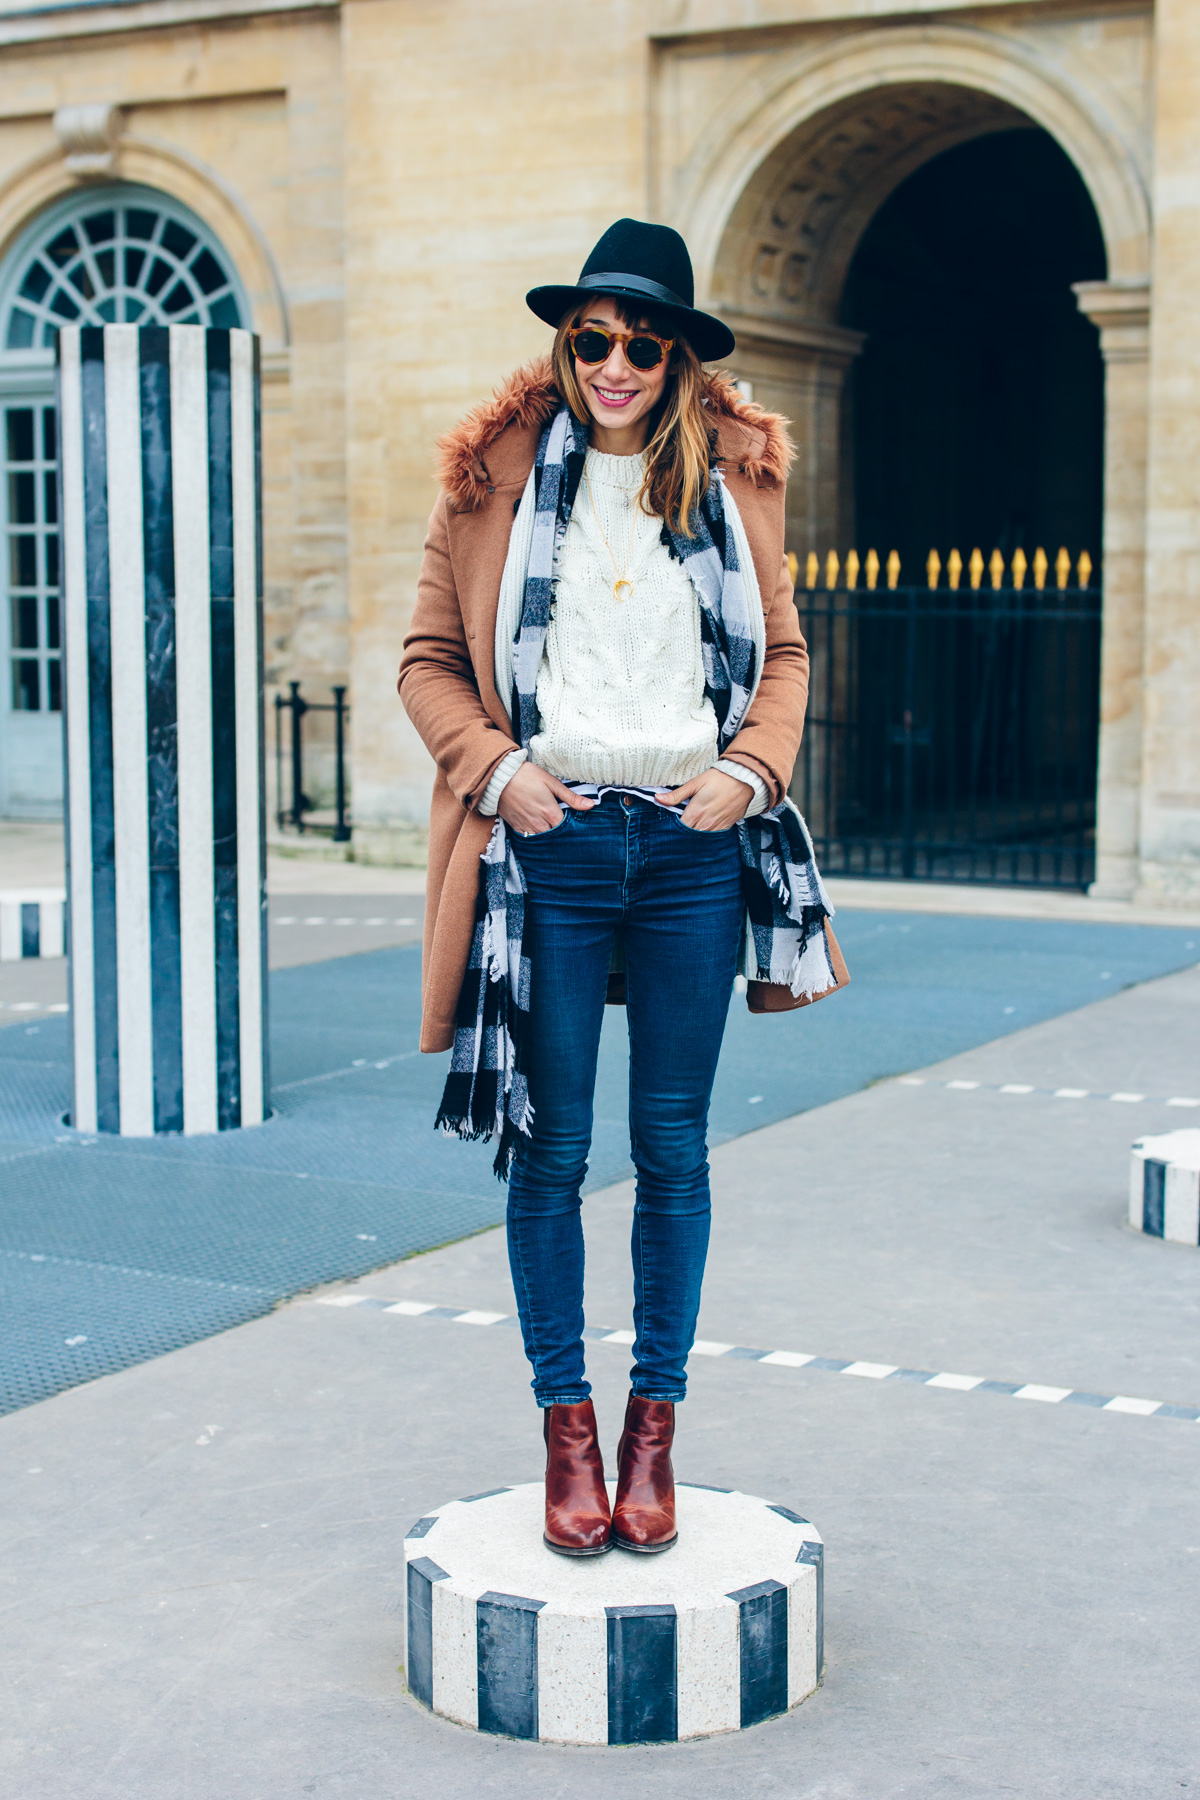 Neutral Winter Outfit in Paris | The Fox & She | Chicago Fashion Blog